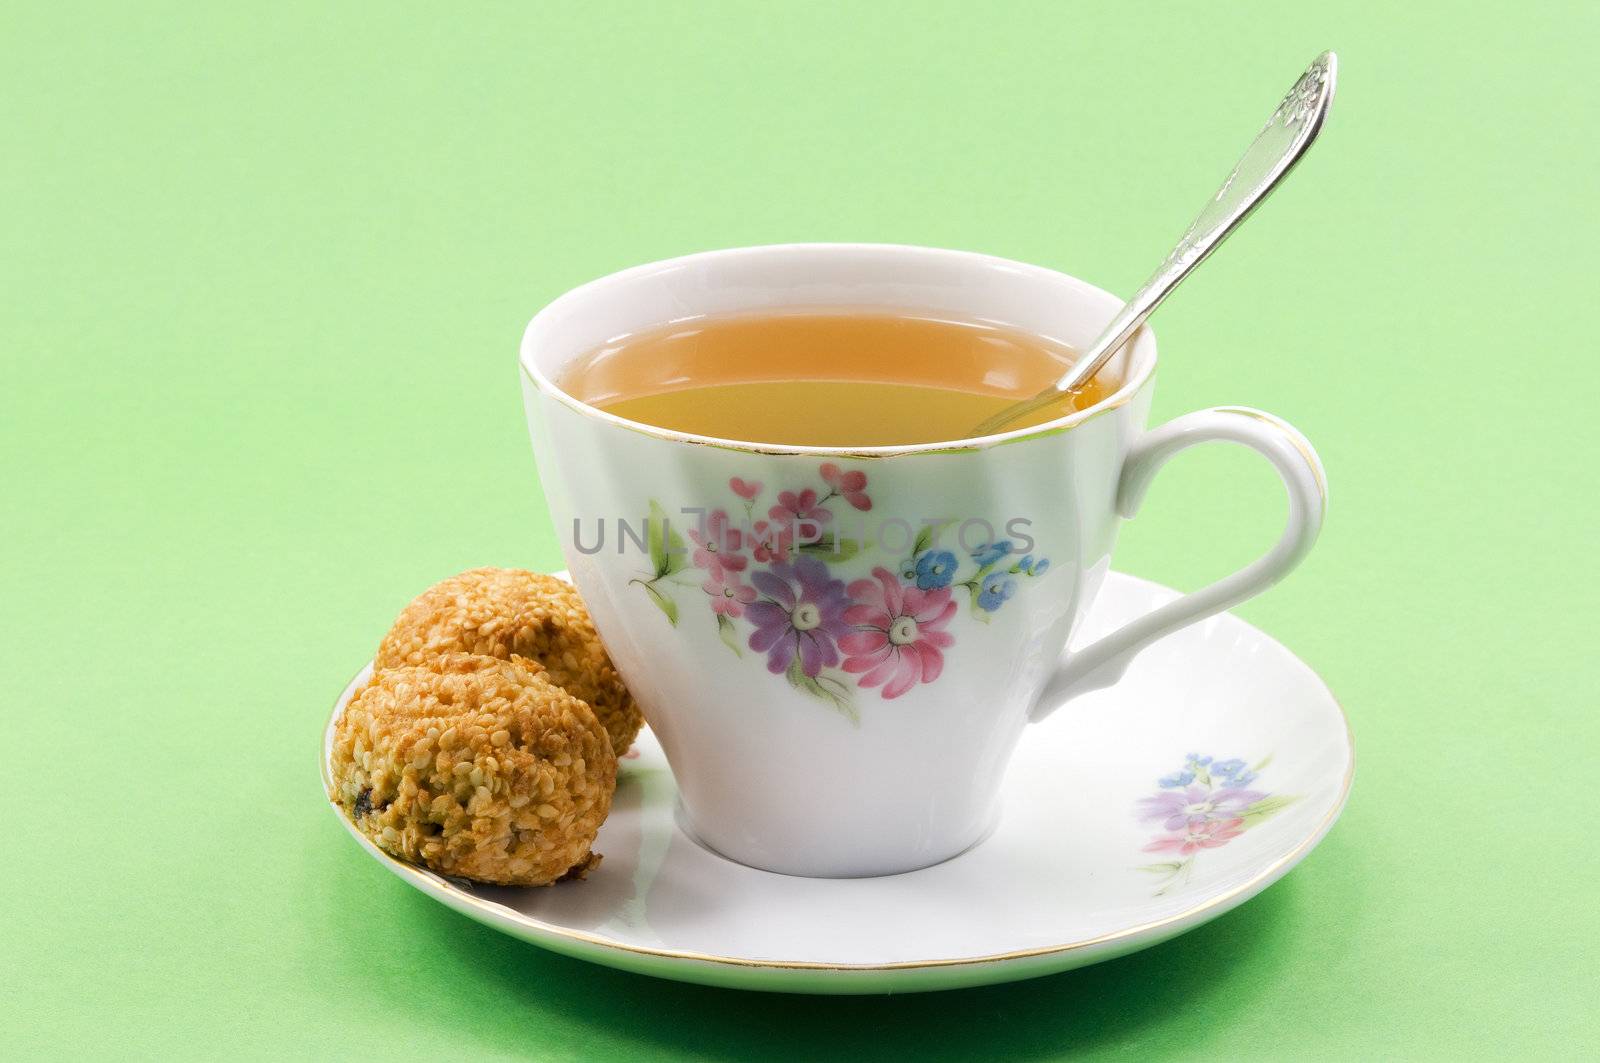 	
A cup of tea and two balls of coconut biscuits
